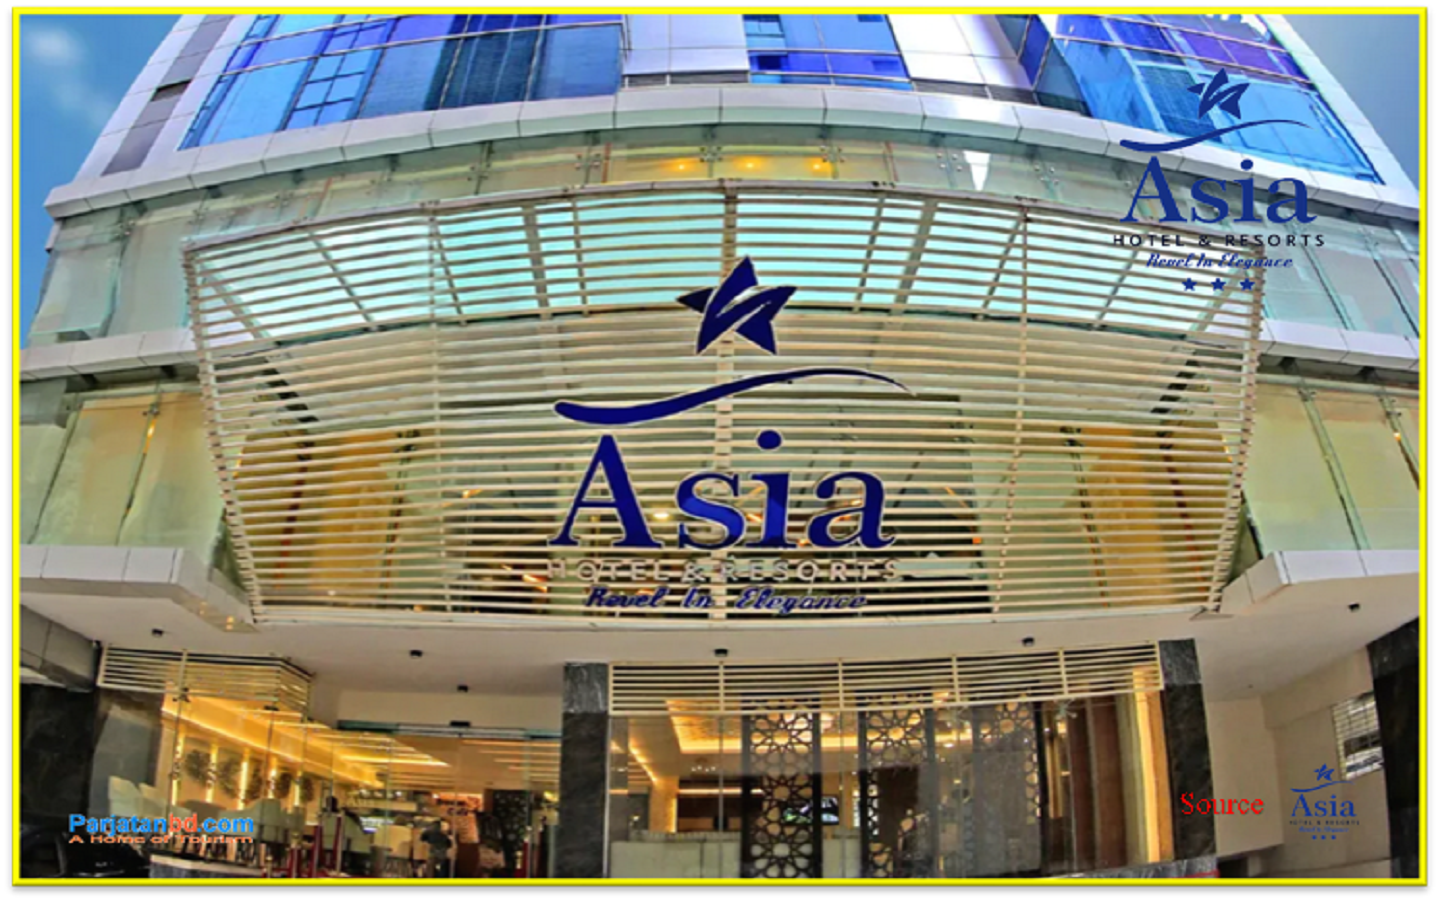 Asia Hotel & Resorts, Topkhana Road Picture-1